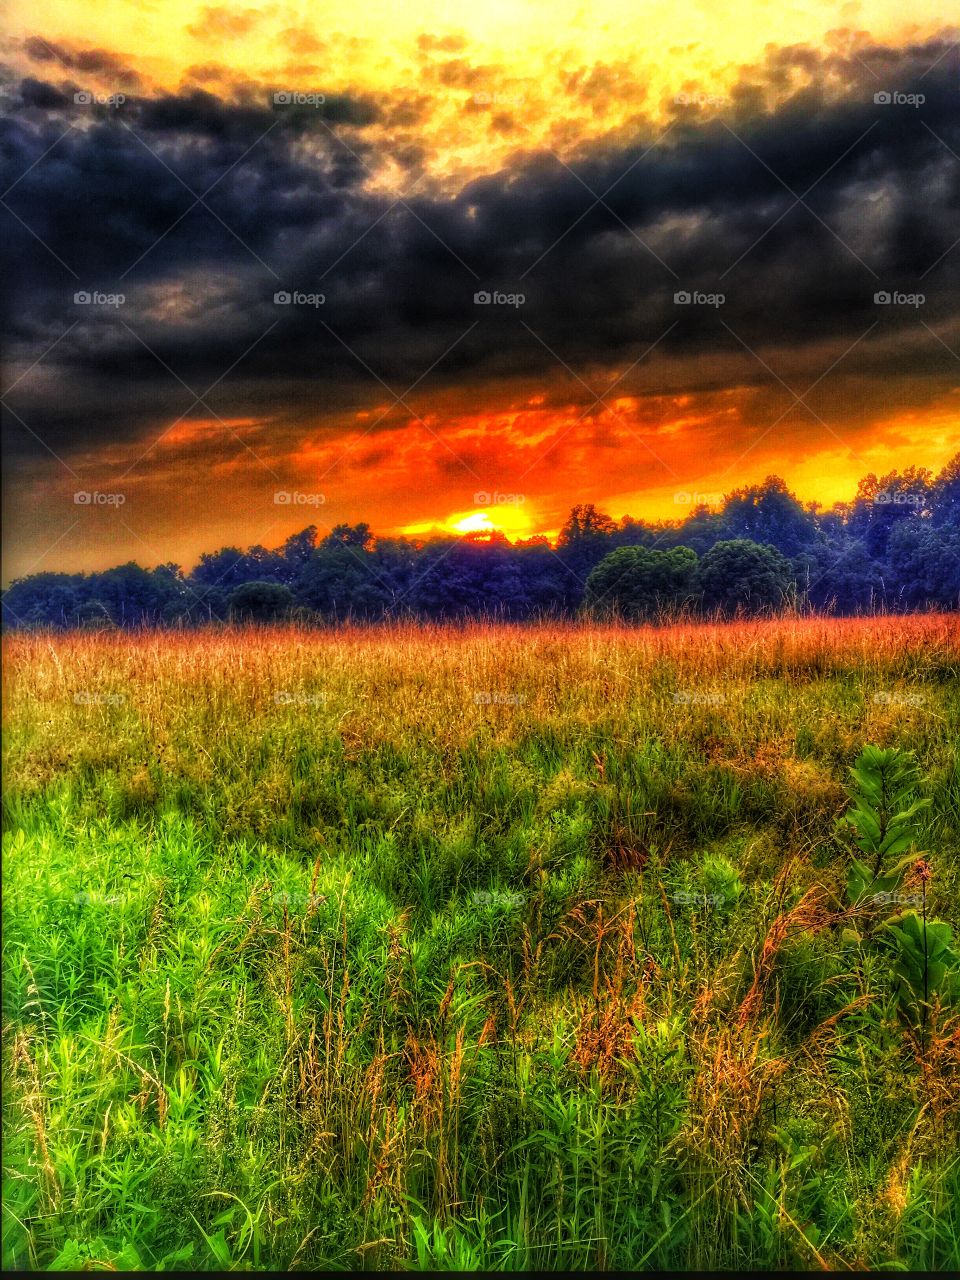 Fiery fields ablaze. Sunset over the meadow made some amazing colors pop out. 